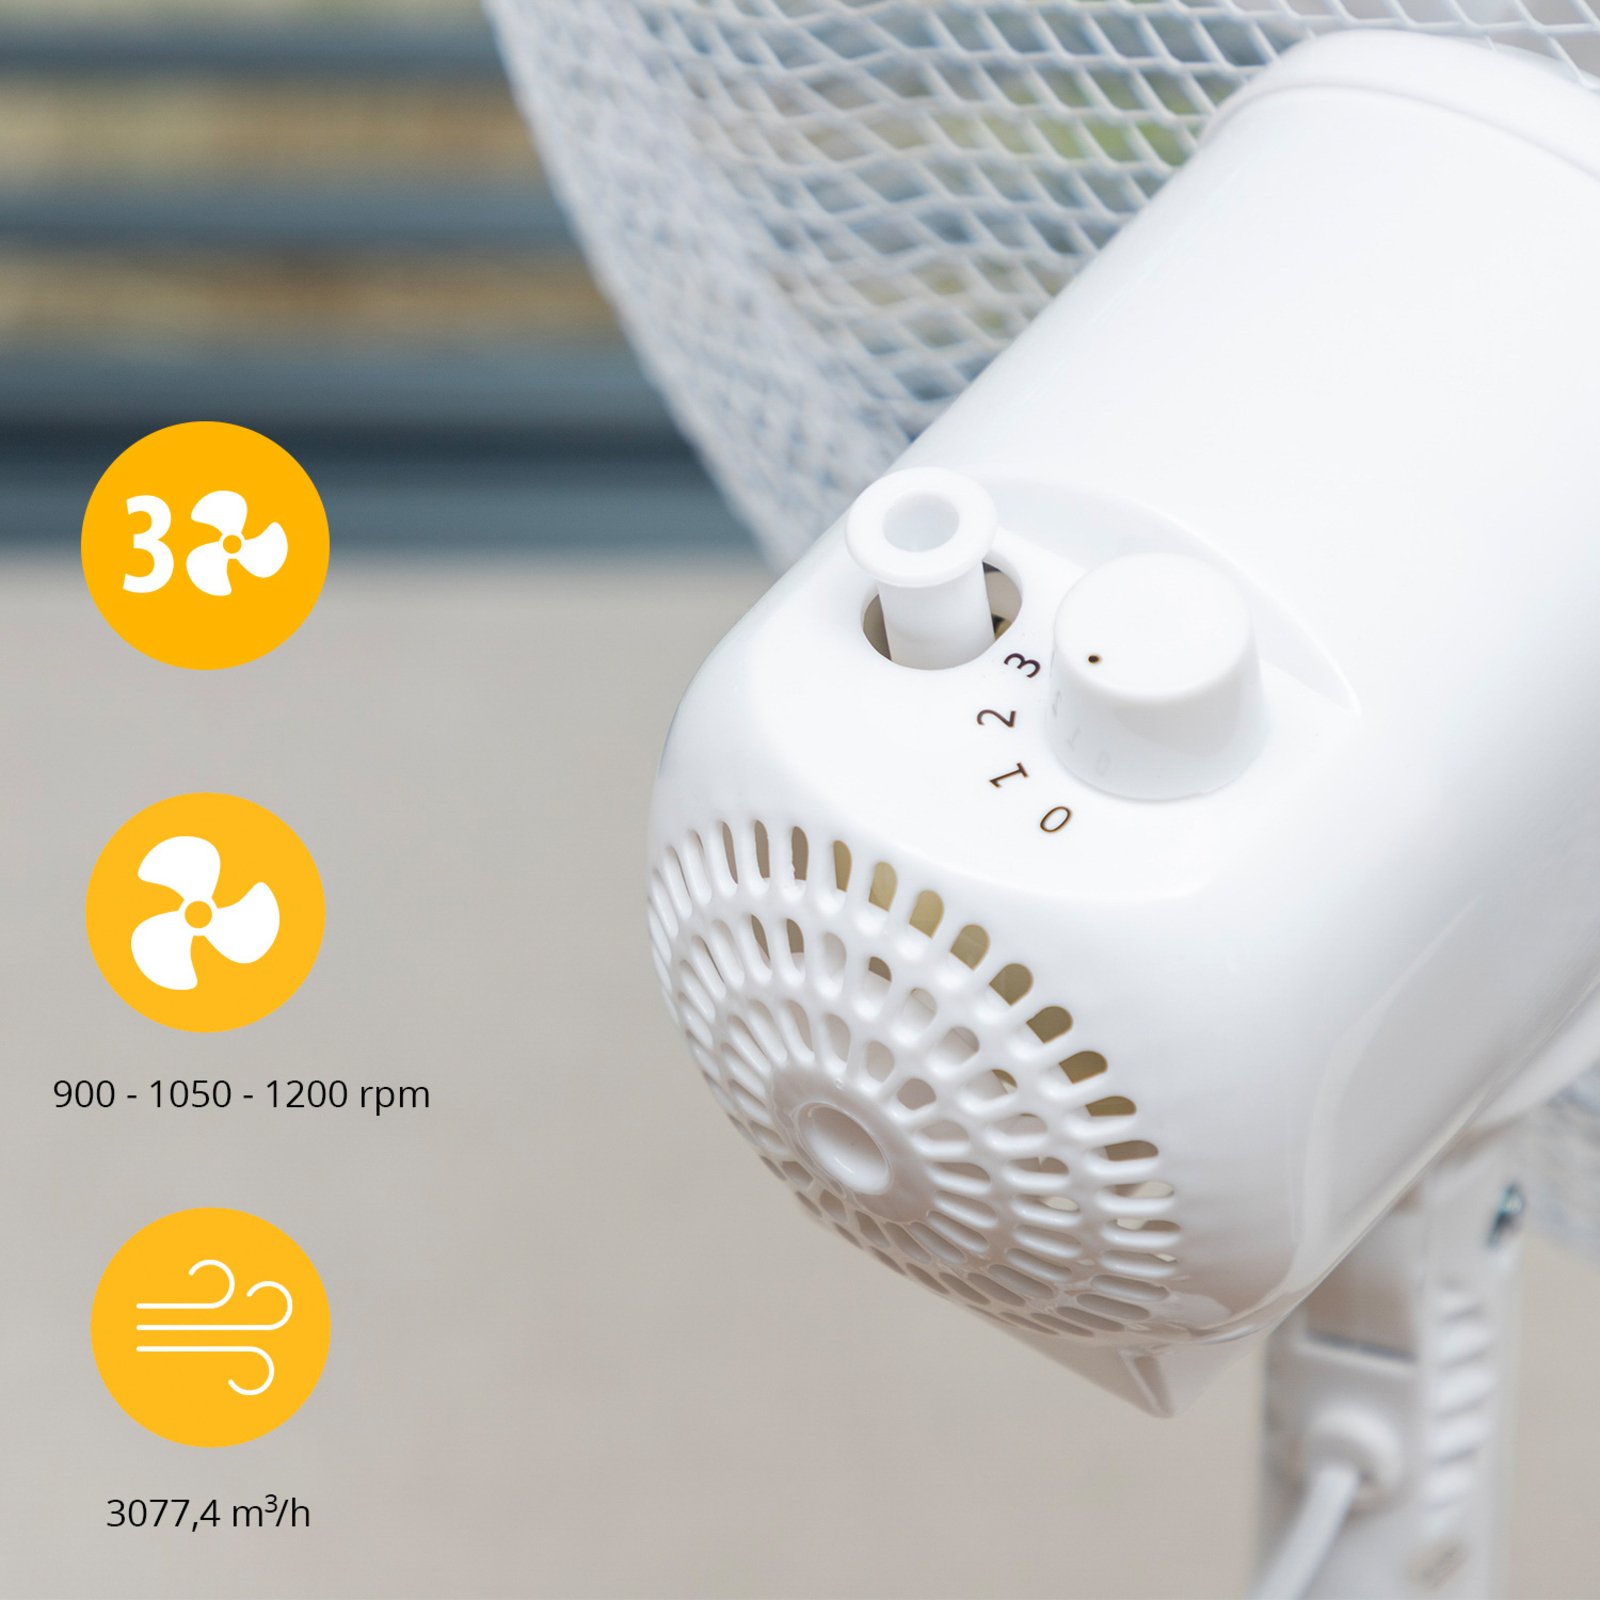 White table fan VE-5727 with 3 settings